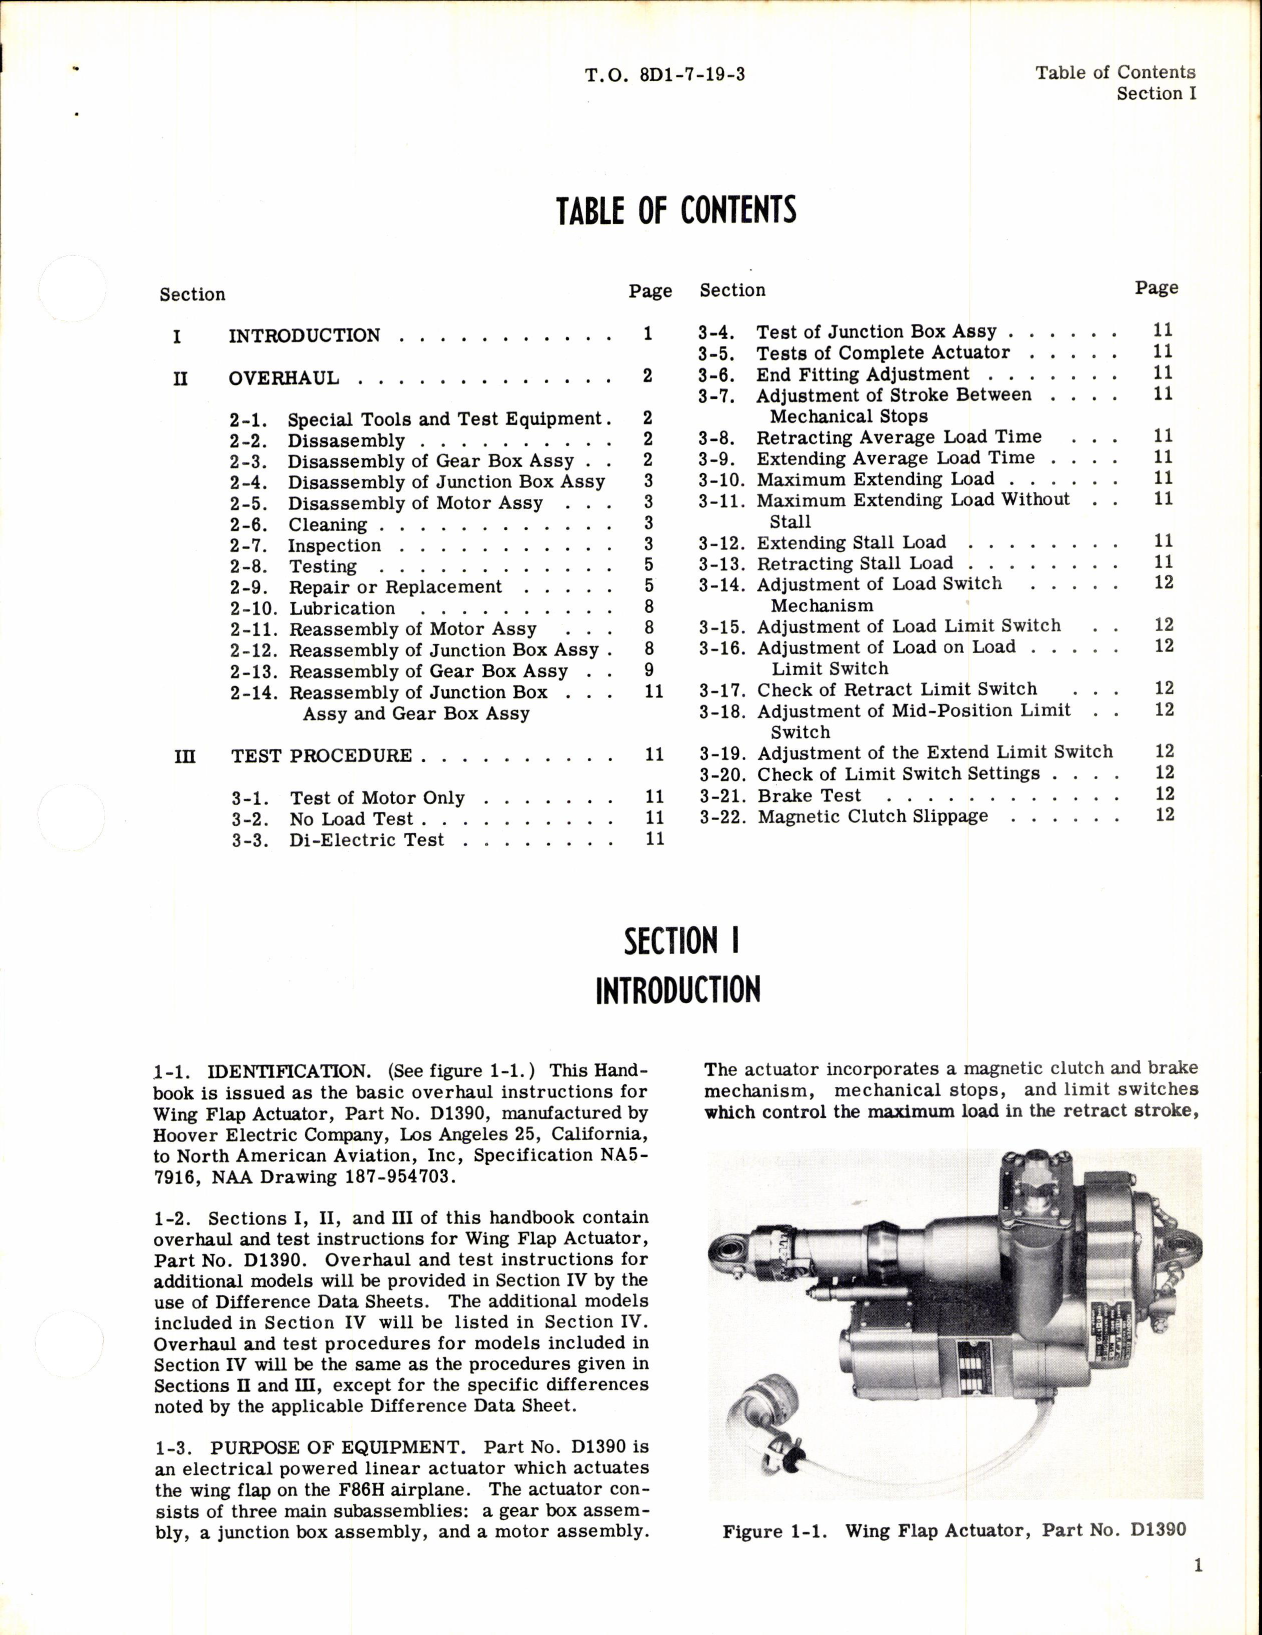 Sample page 3 from AirCorps Library document: Instructions for Wing Flap Actuator Part No D1390